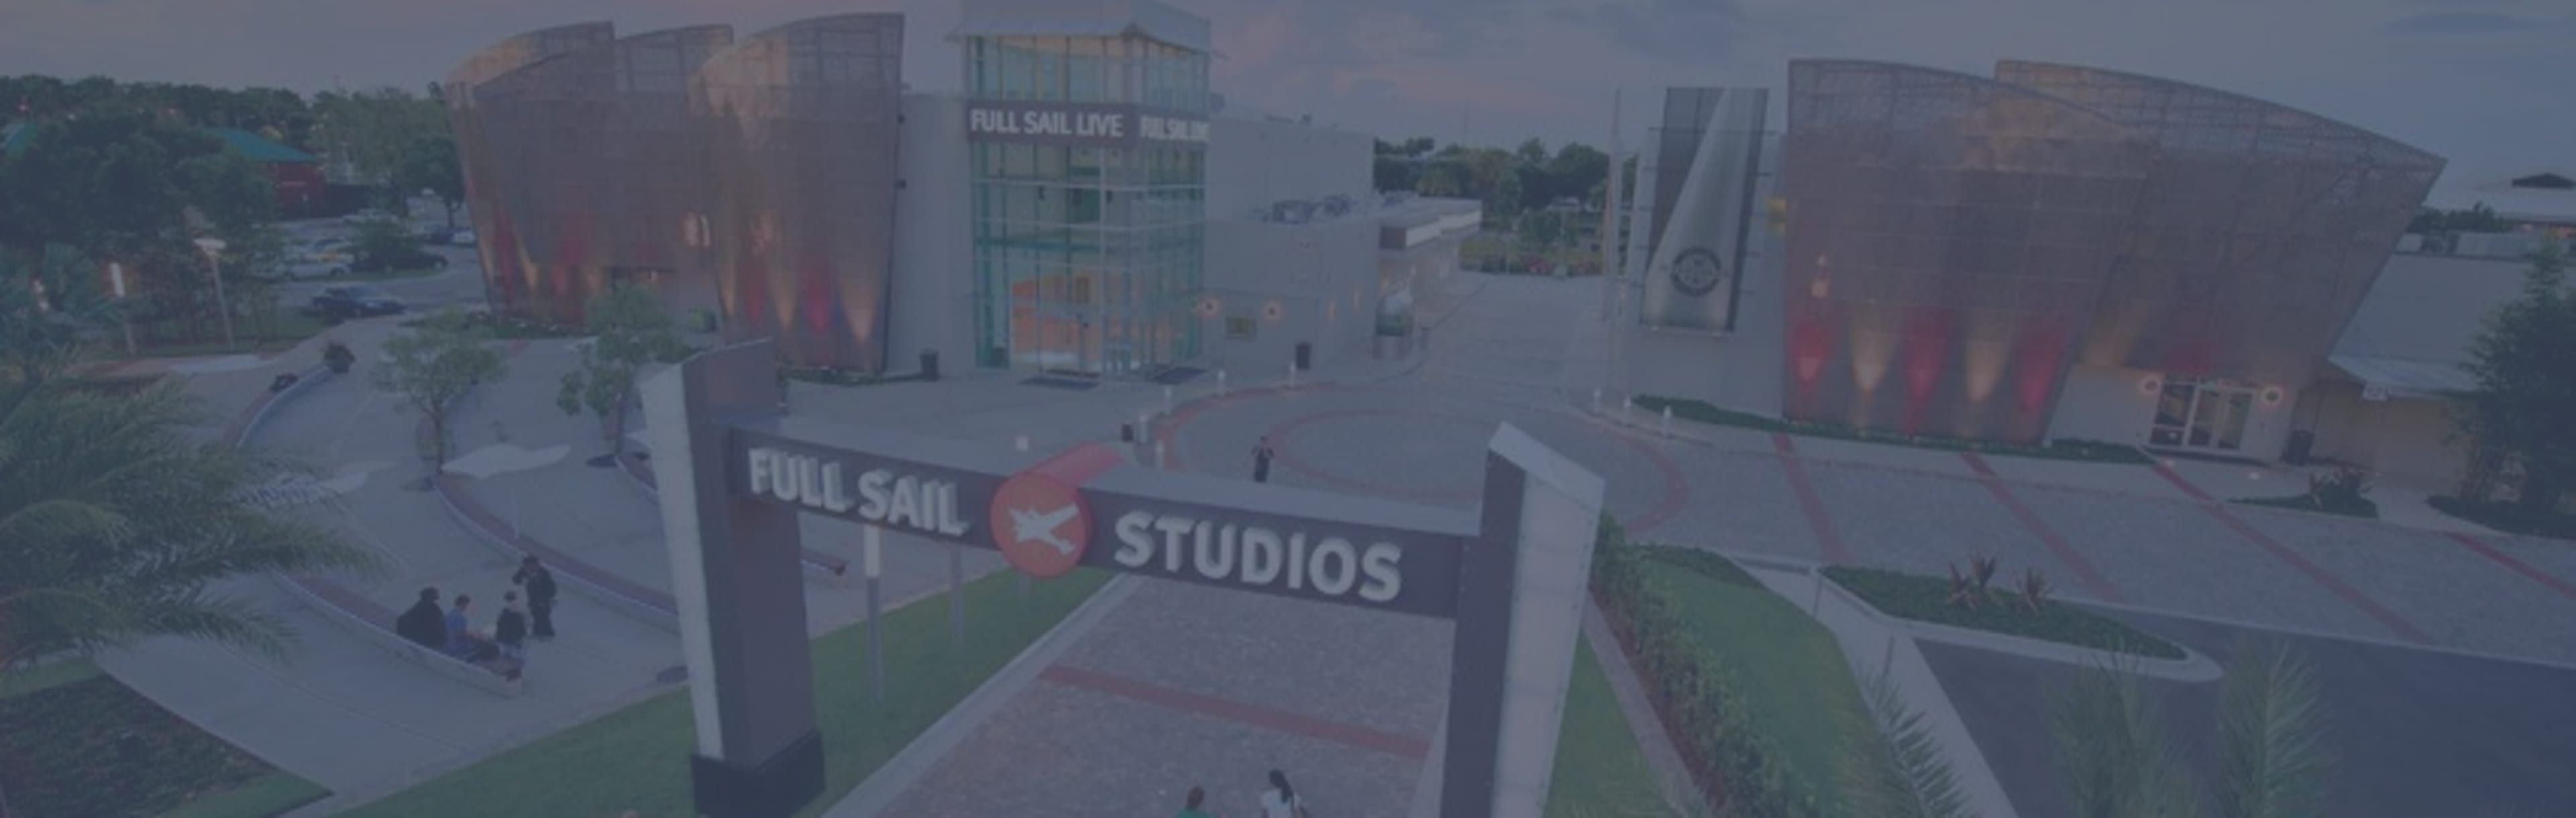 Full Sail University Master of Science in Business Intelligence